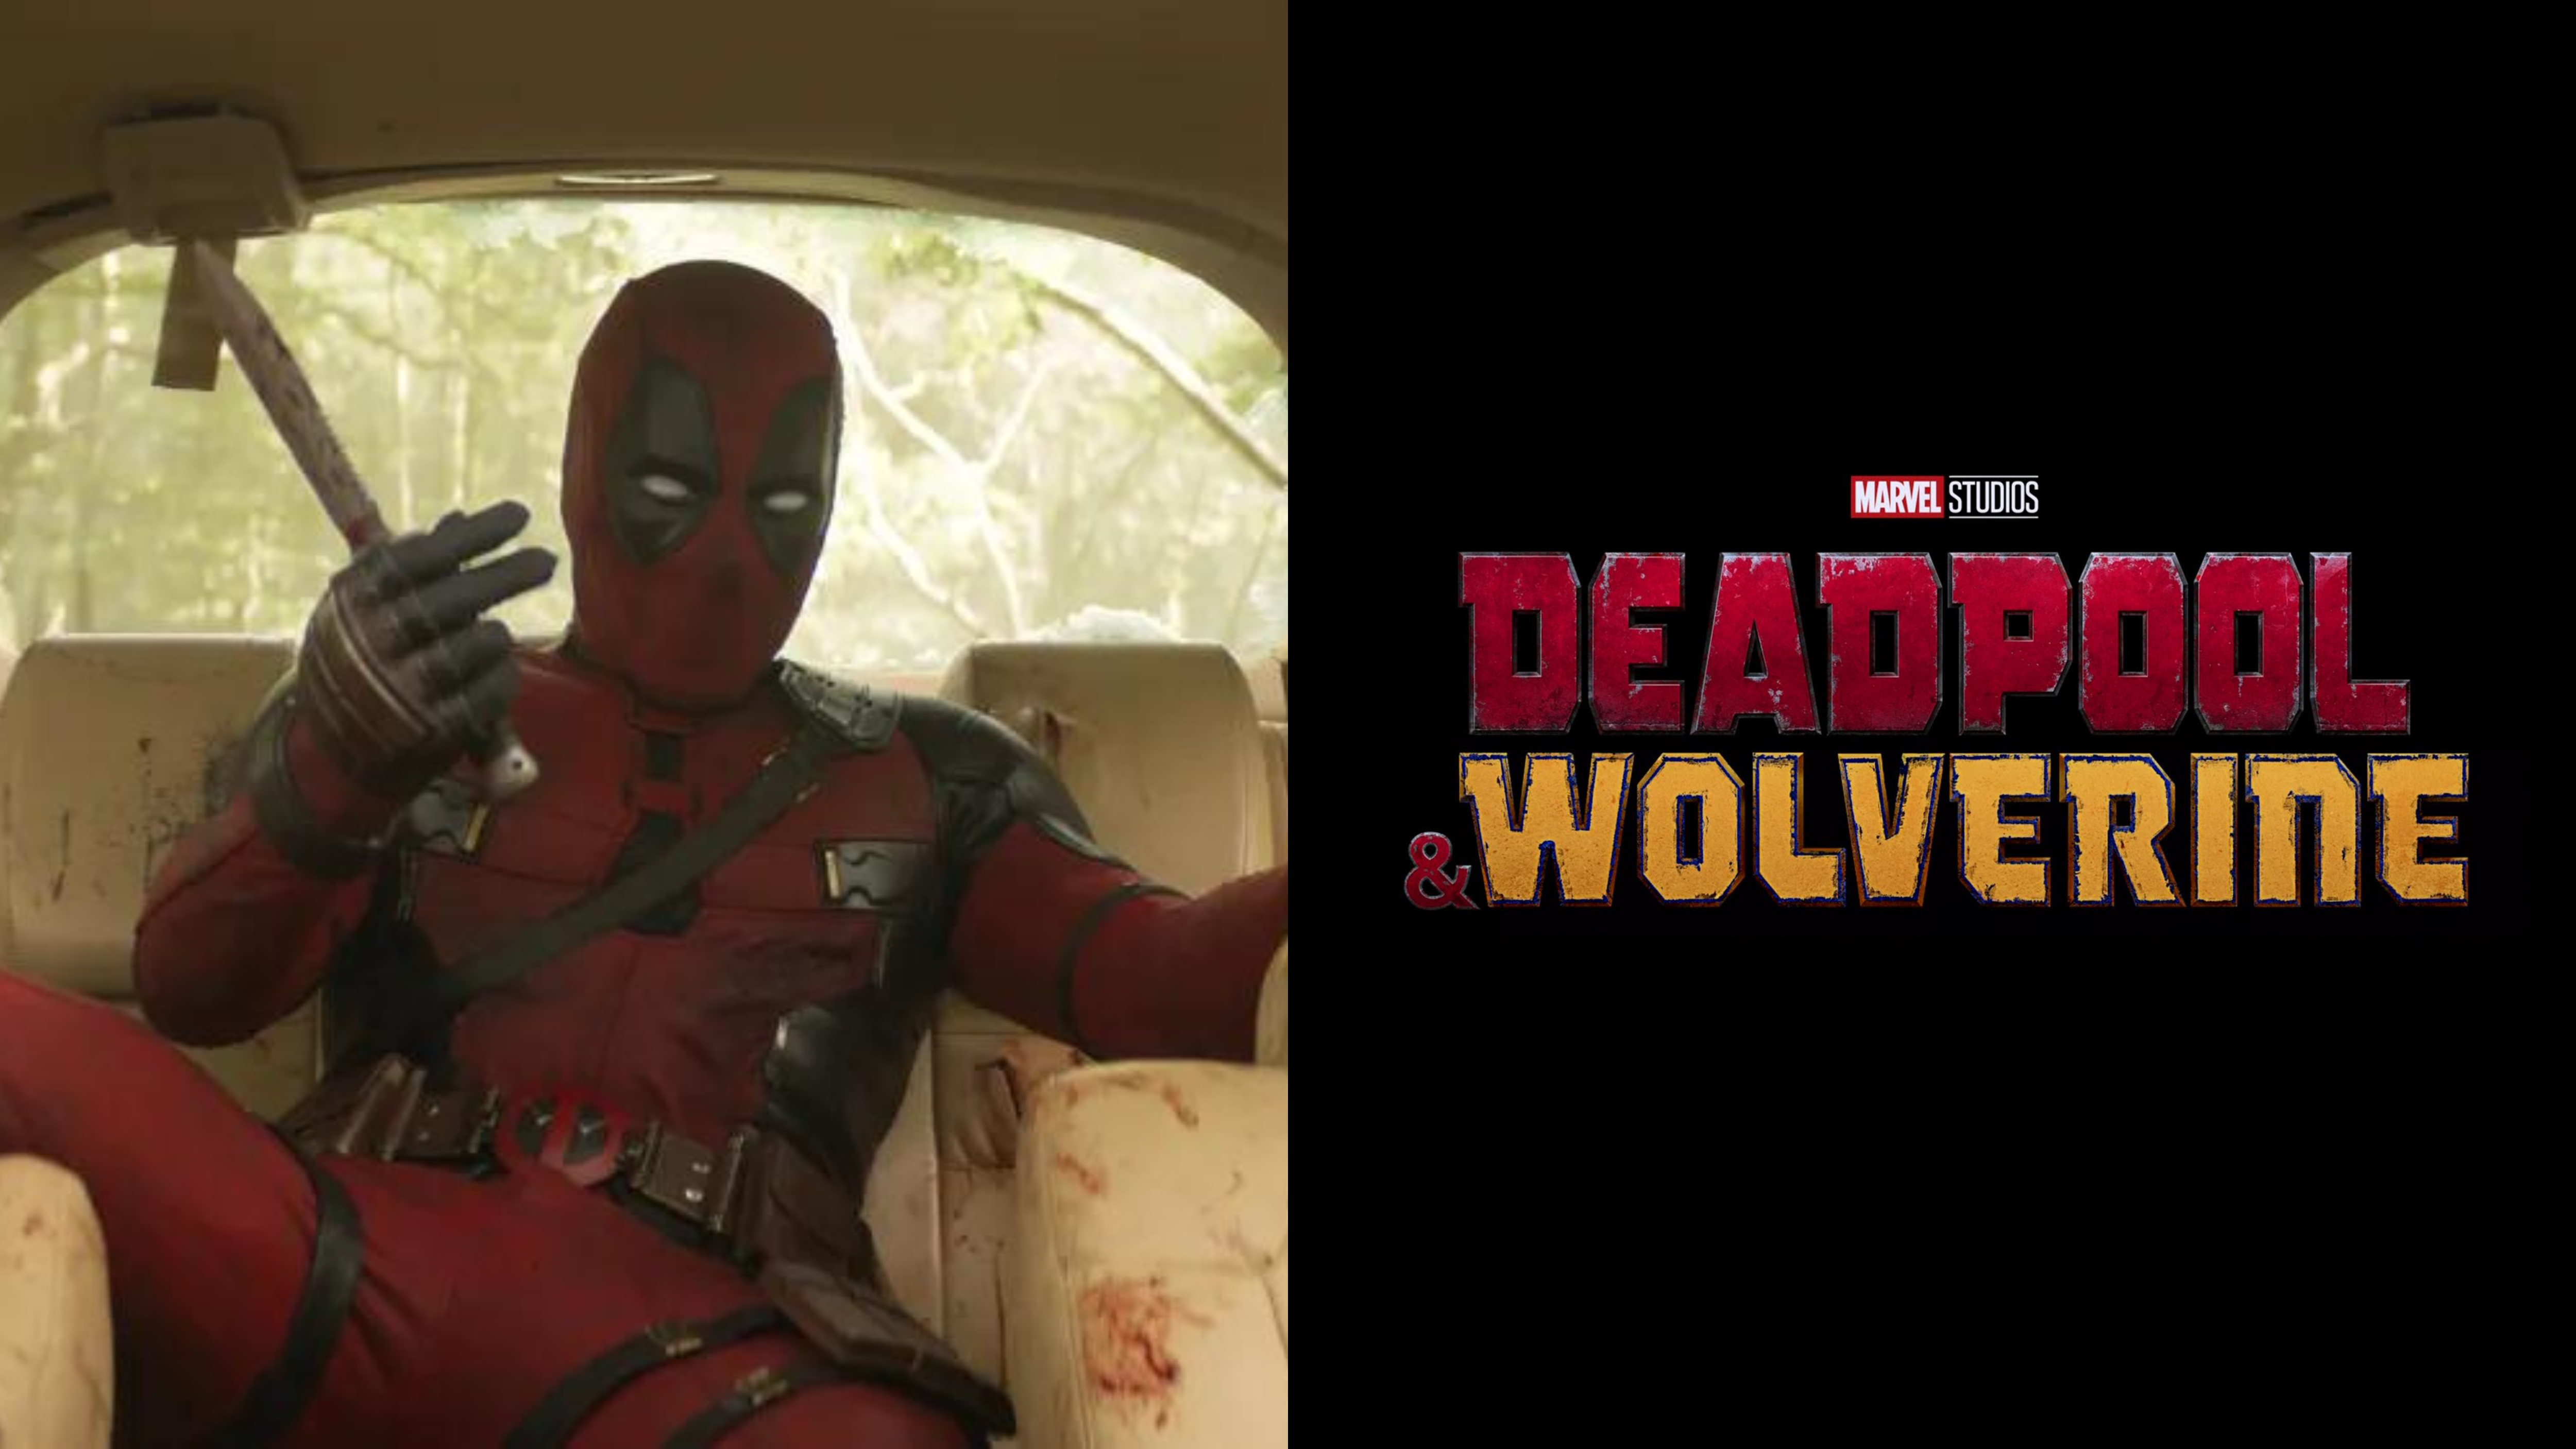 Image of Deadpool and Deadpool & Wolverine Poster amidst the new Deadpool & Wolverine Trailer.